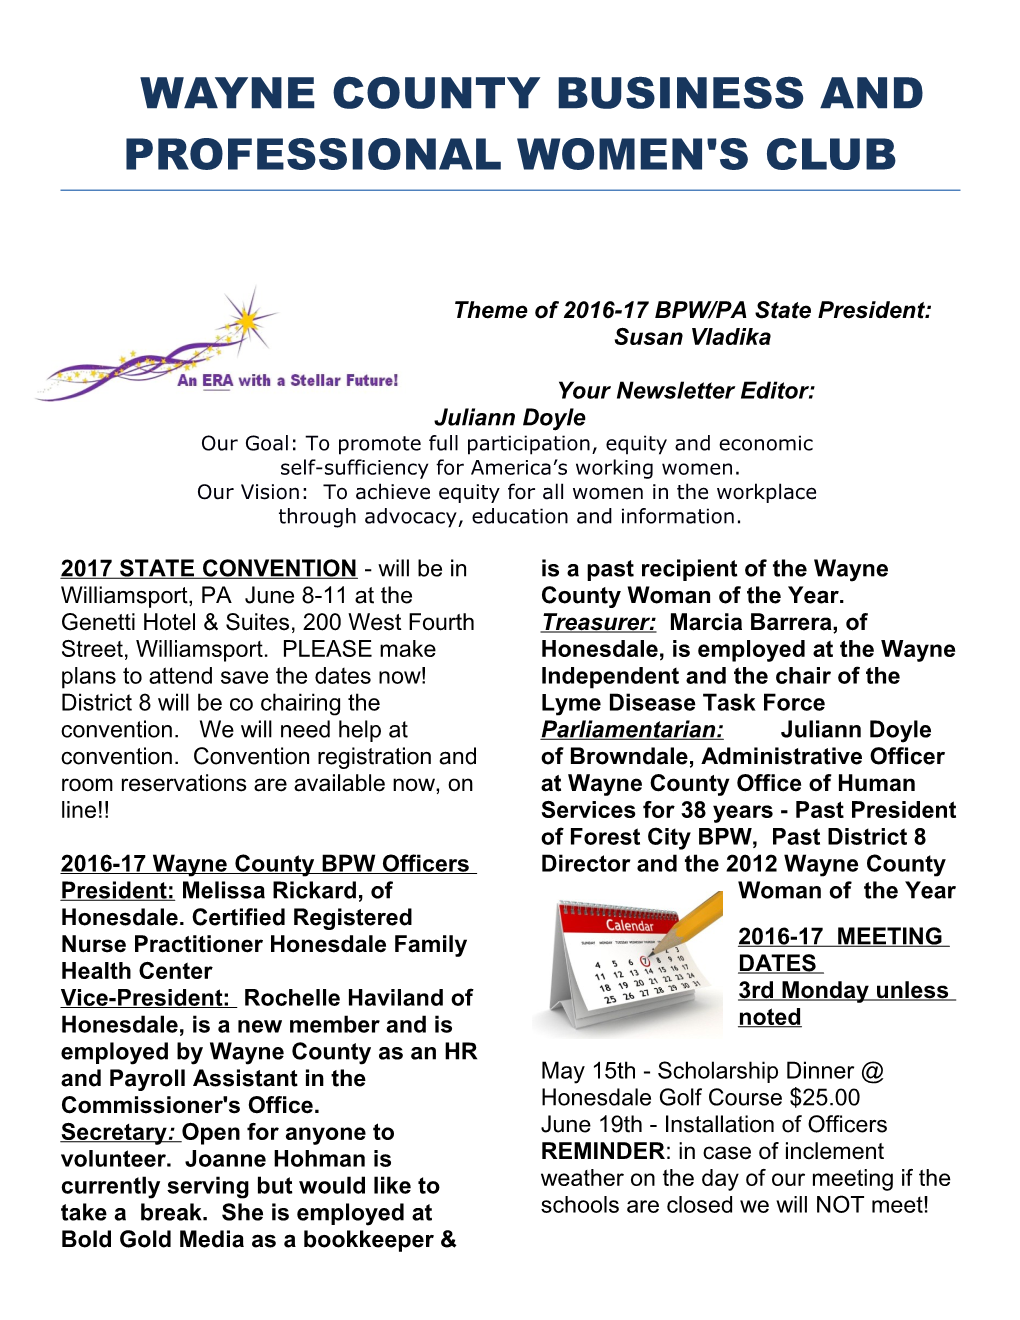 Wayne County Business and Professional Women's Club